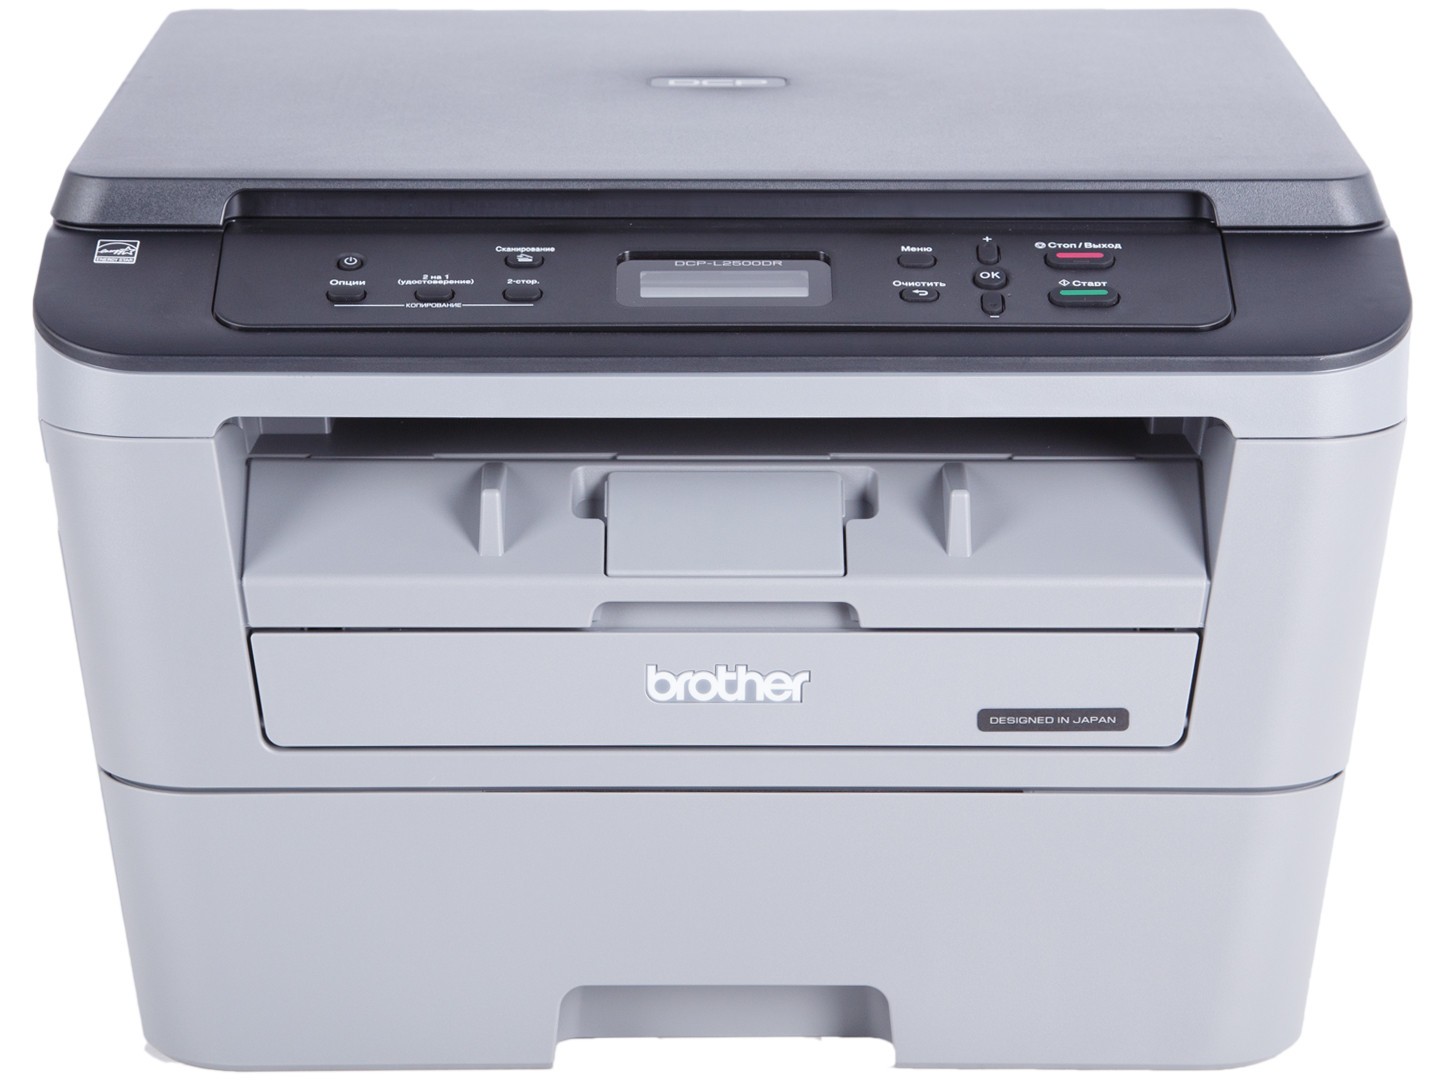 Brother l2500. МФУ brother DCP-l2500dr. МФУ лазерный brother DCP-l2500dr, a4, лазерный. Принтер brother DCP l2500dr. Лазерное МФУ DCP-l6600dw.